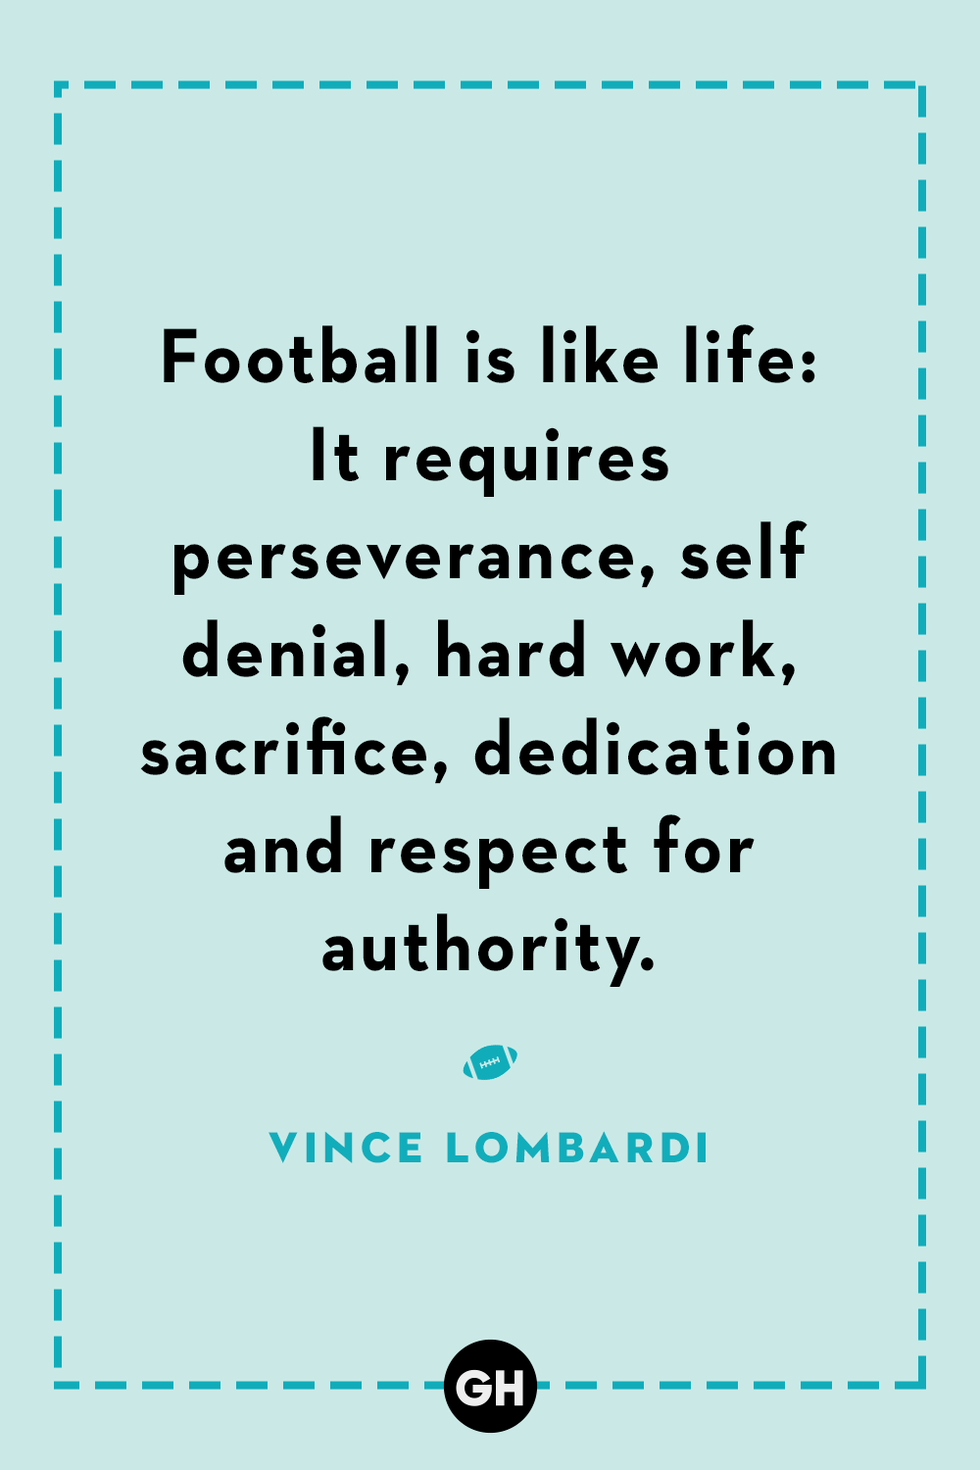 20+ Memorial Quotes For Athletes, Coaches and Sports Lovers